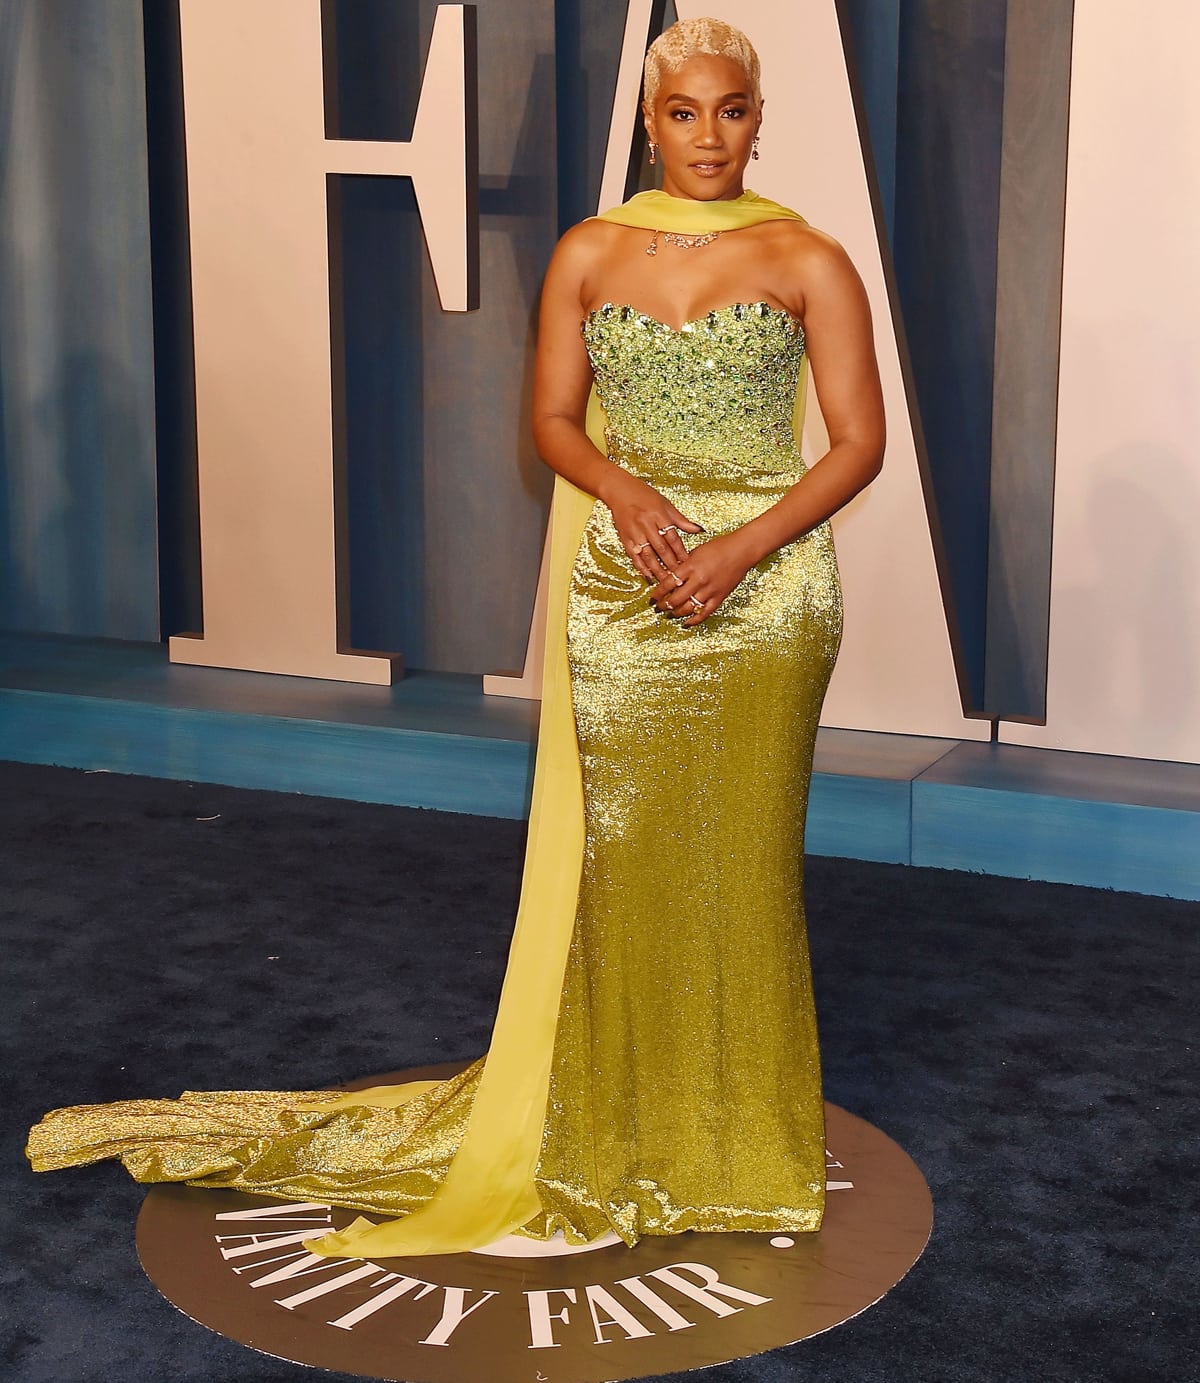 Tiffany Haddish in a lime green Dolce & Gabbana gown at the 2022 Vanity Fair Oscar Party